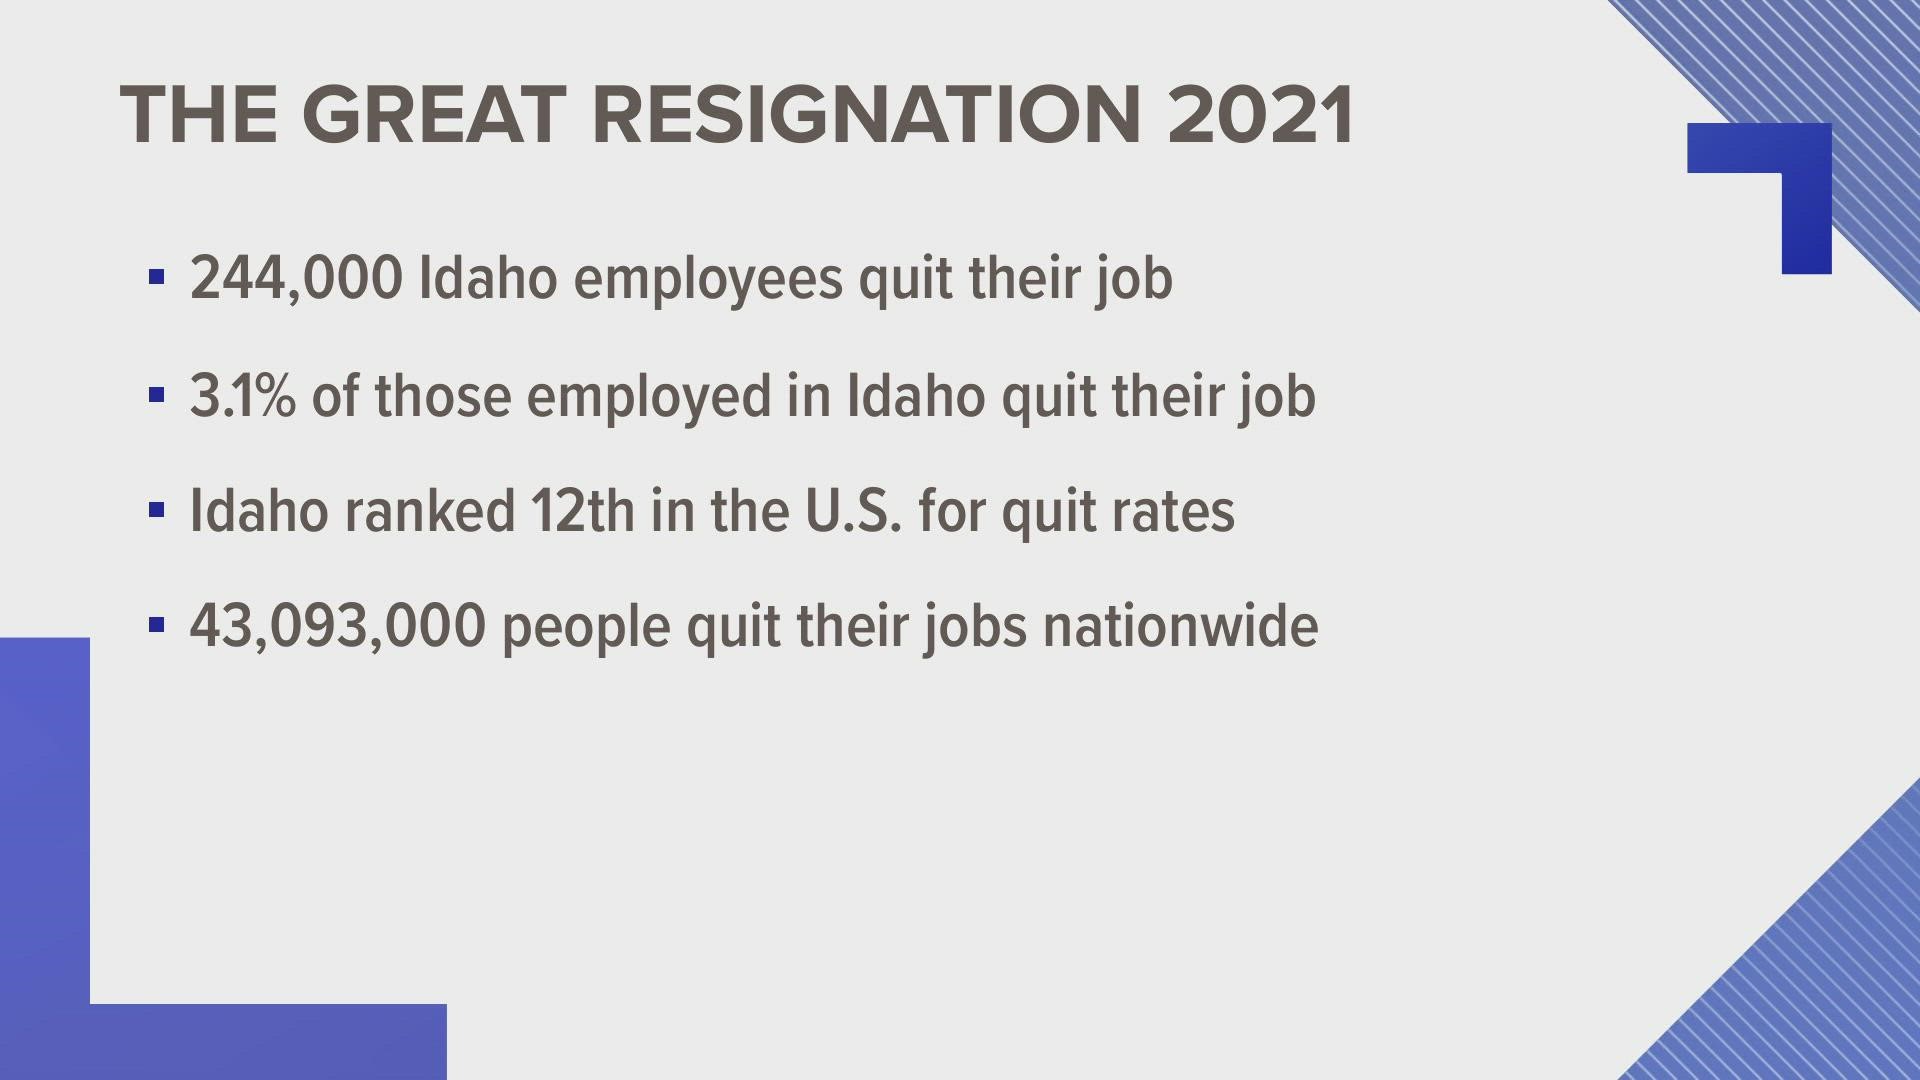 With 3.1% of workers leaving their place of employment last year, the Gem State ranked 12th in the U.S. for rate of quits.